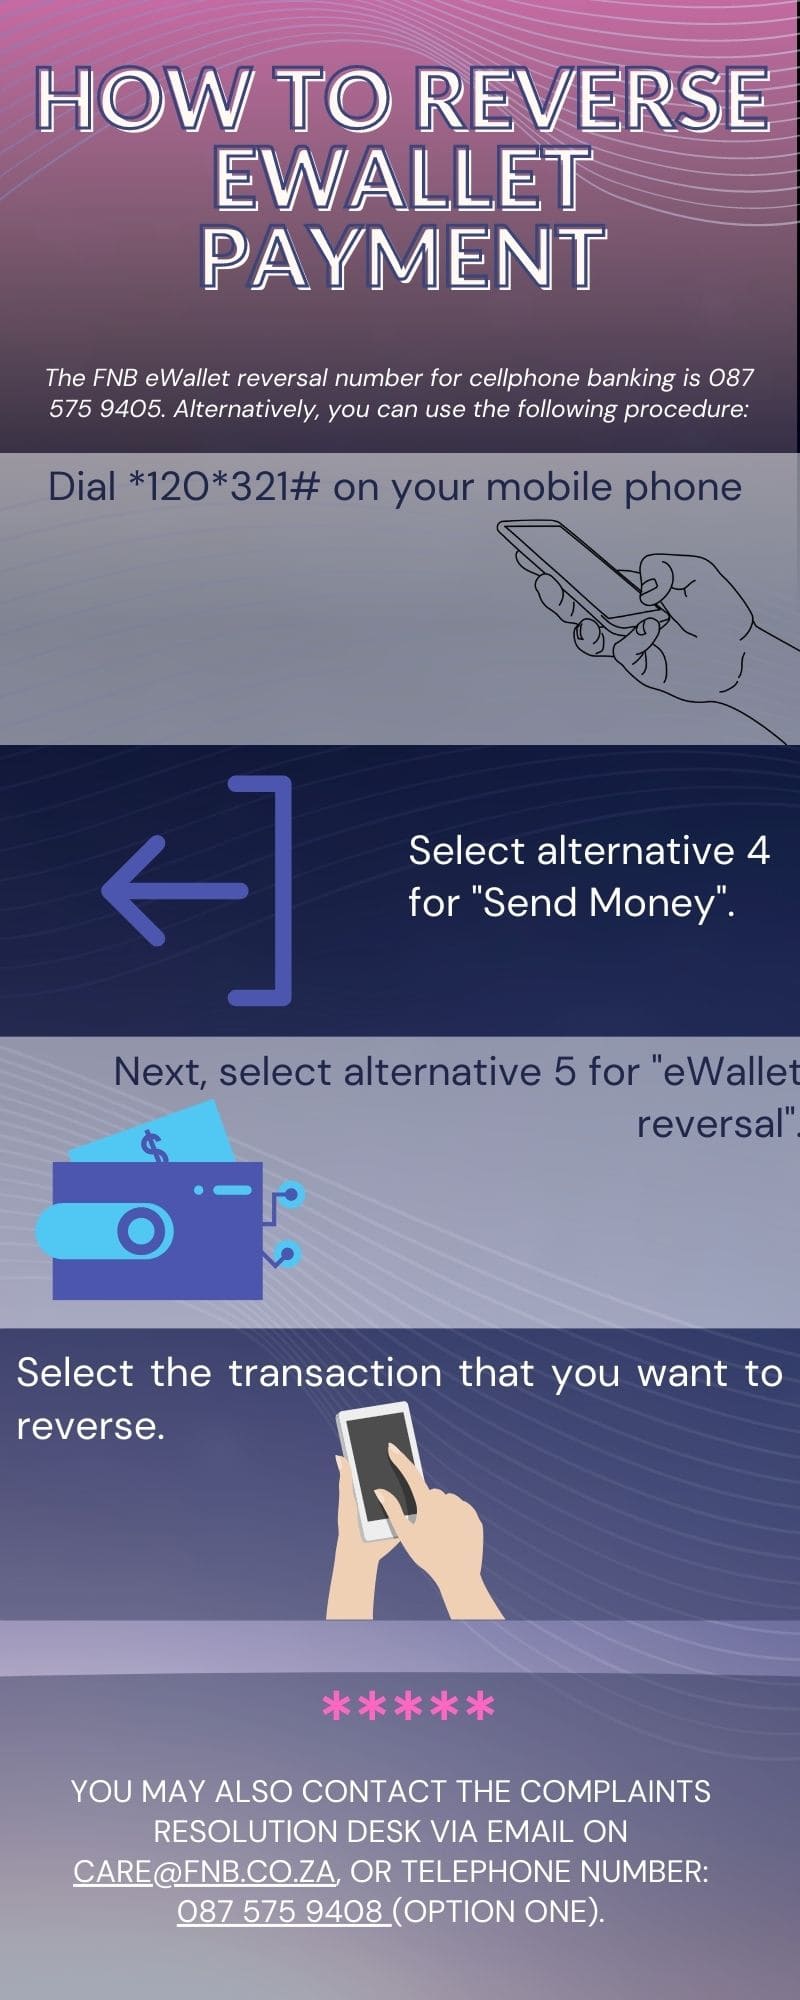 How to reverse eWallet payment